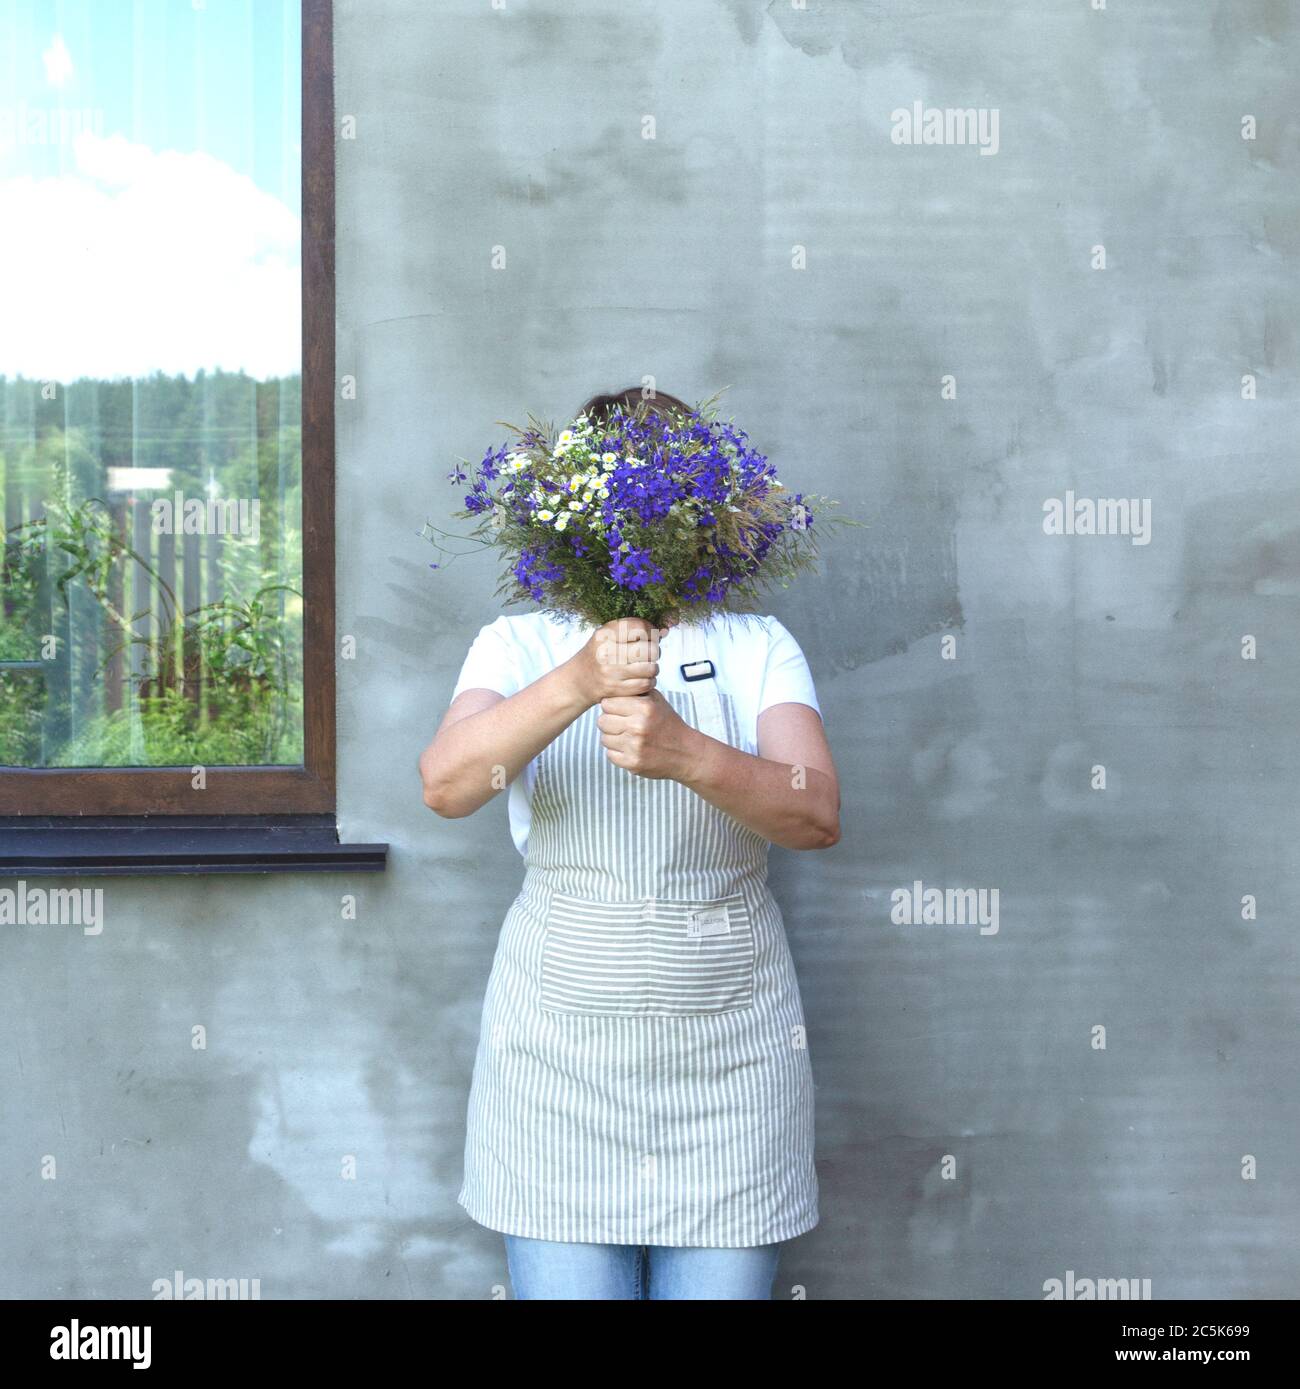 The girl in an apron hides her face behind a bouquet of meadow flowers. The window reflects the sky and the fence. F Stock Photo